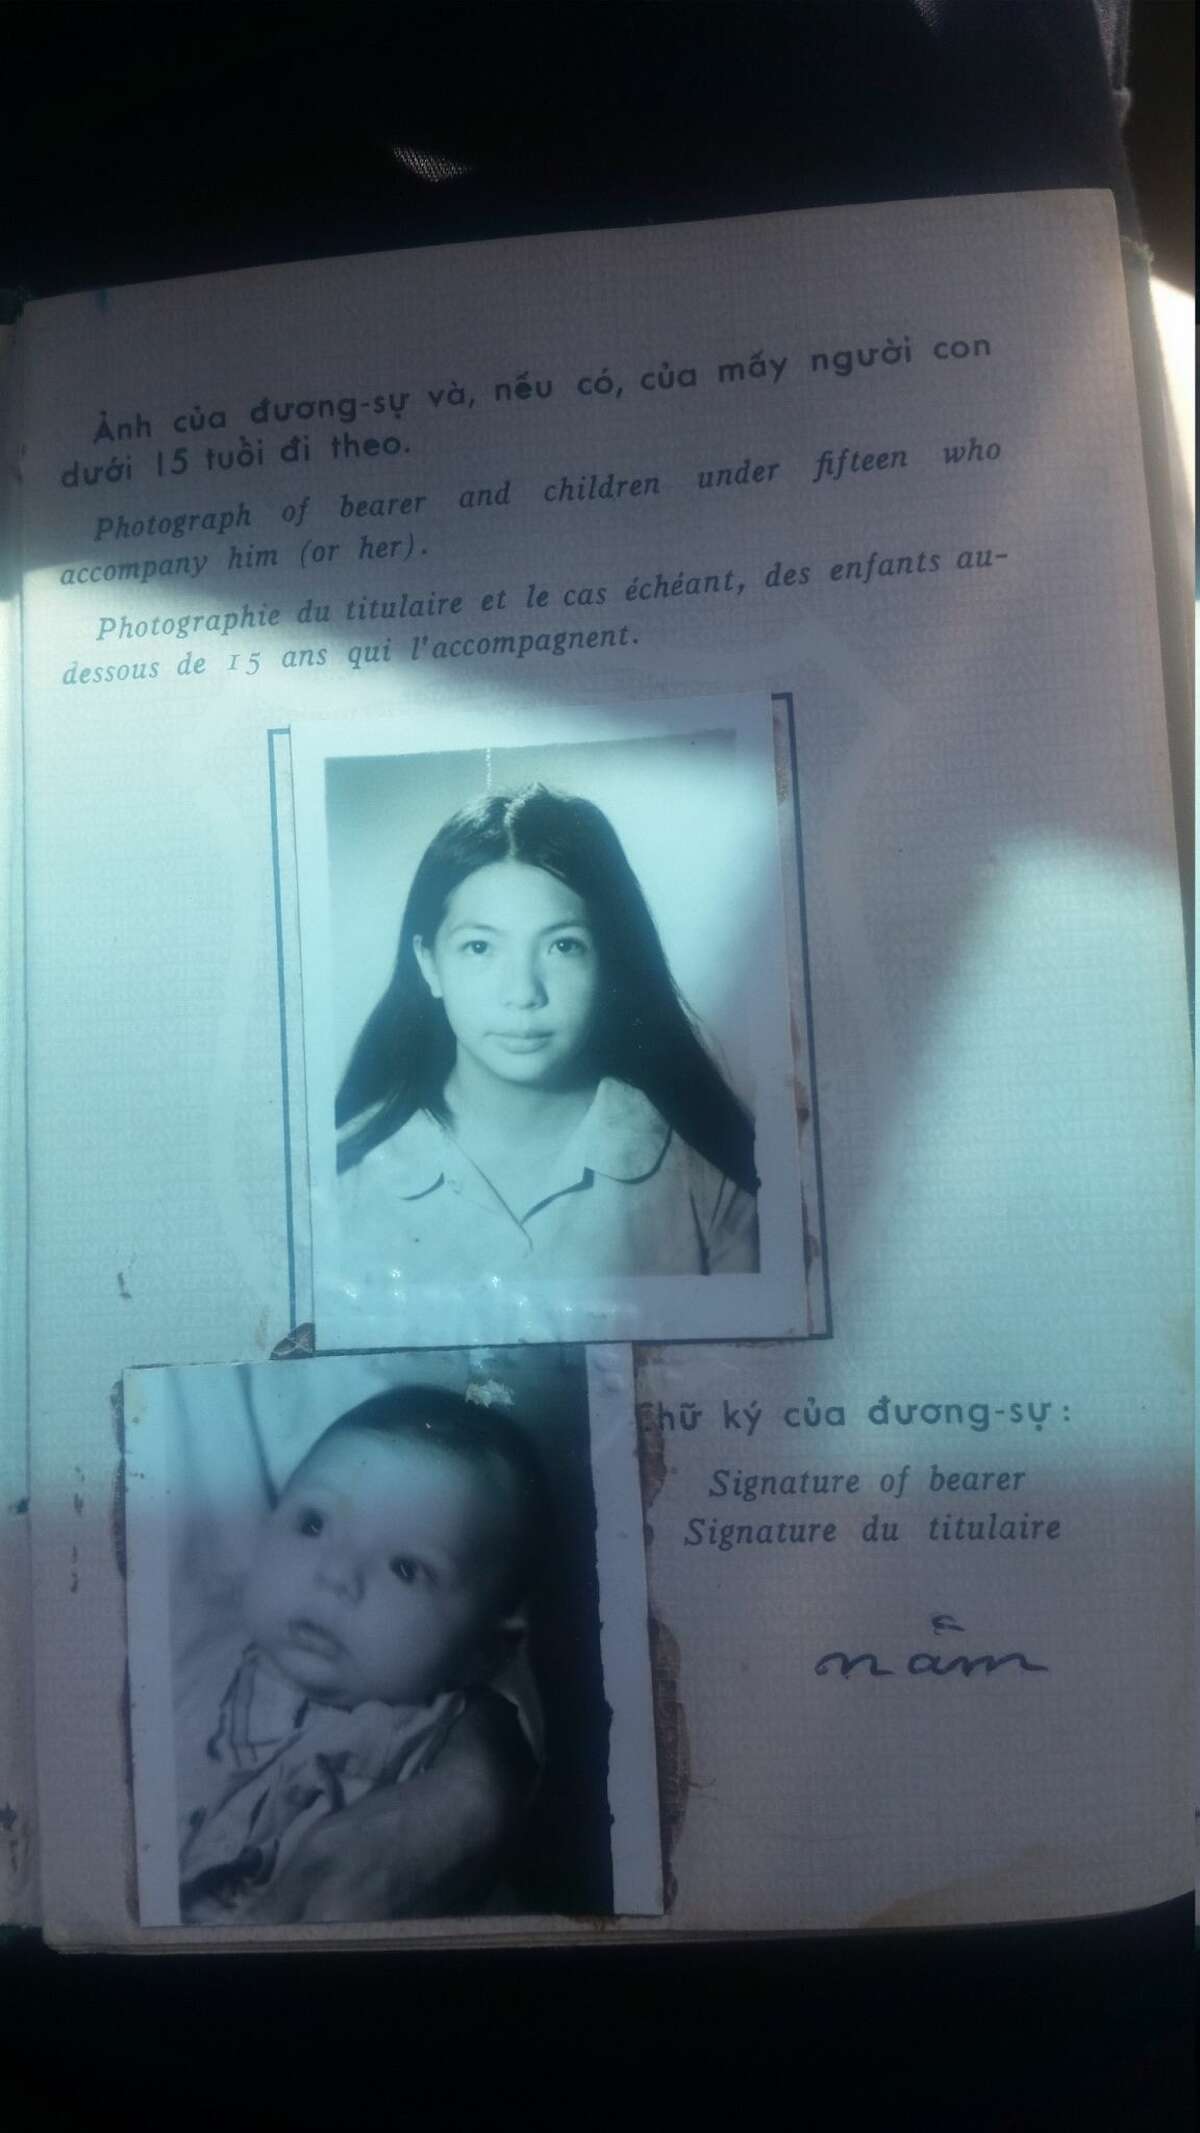 Visa photographs of Kim Remzi as a baby and her mother.